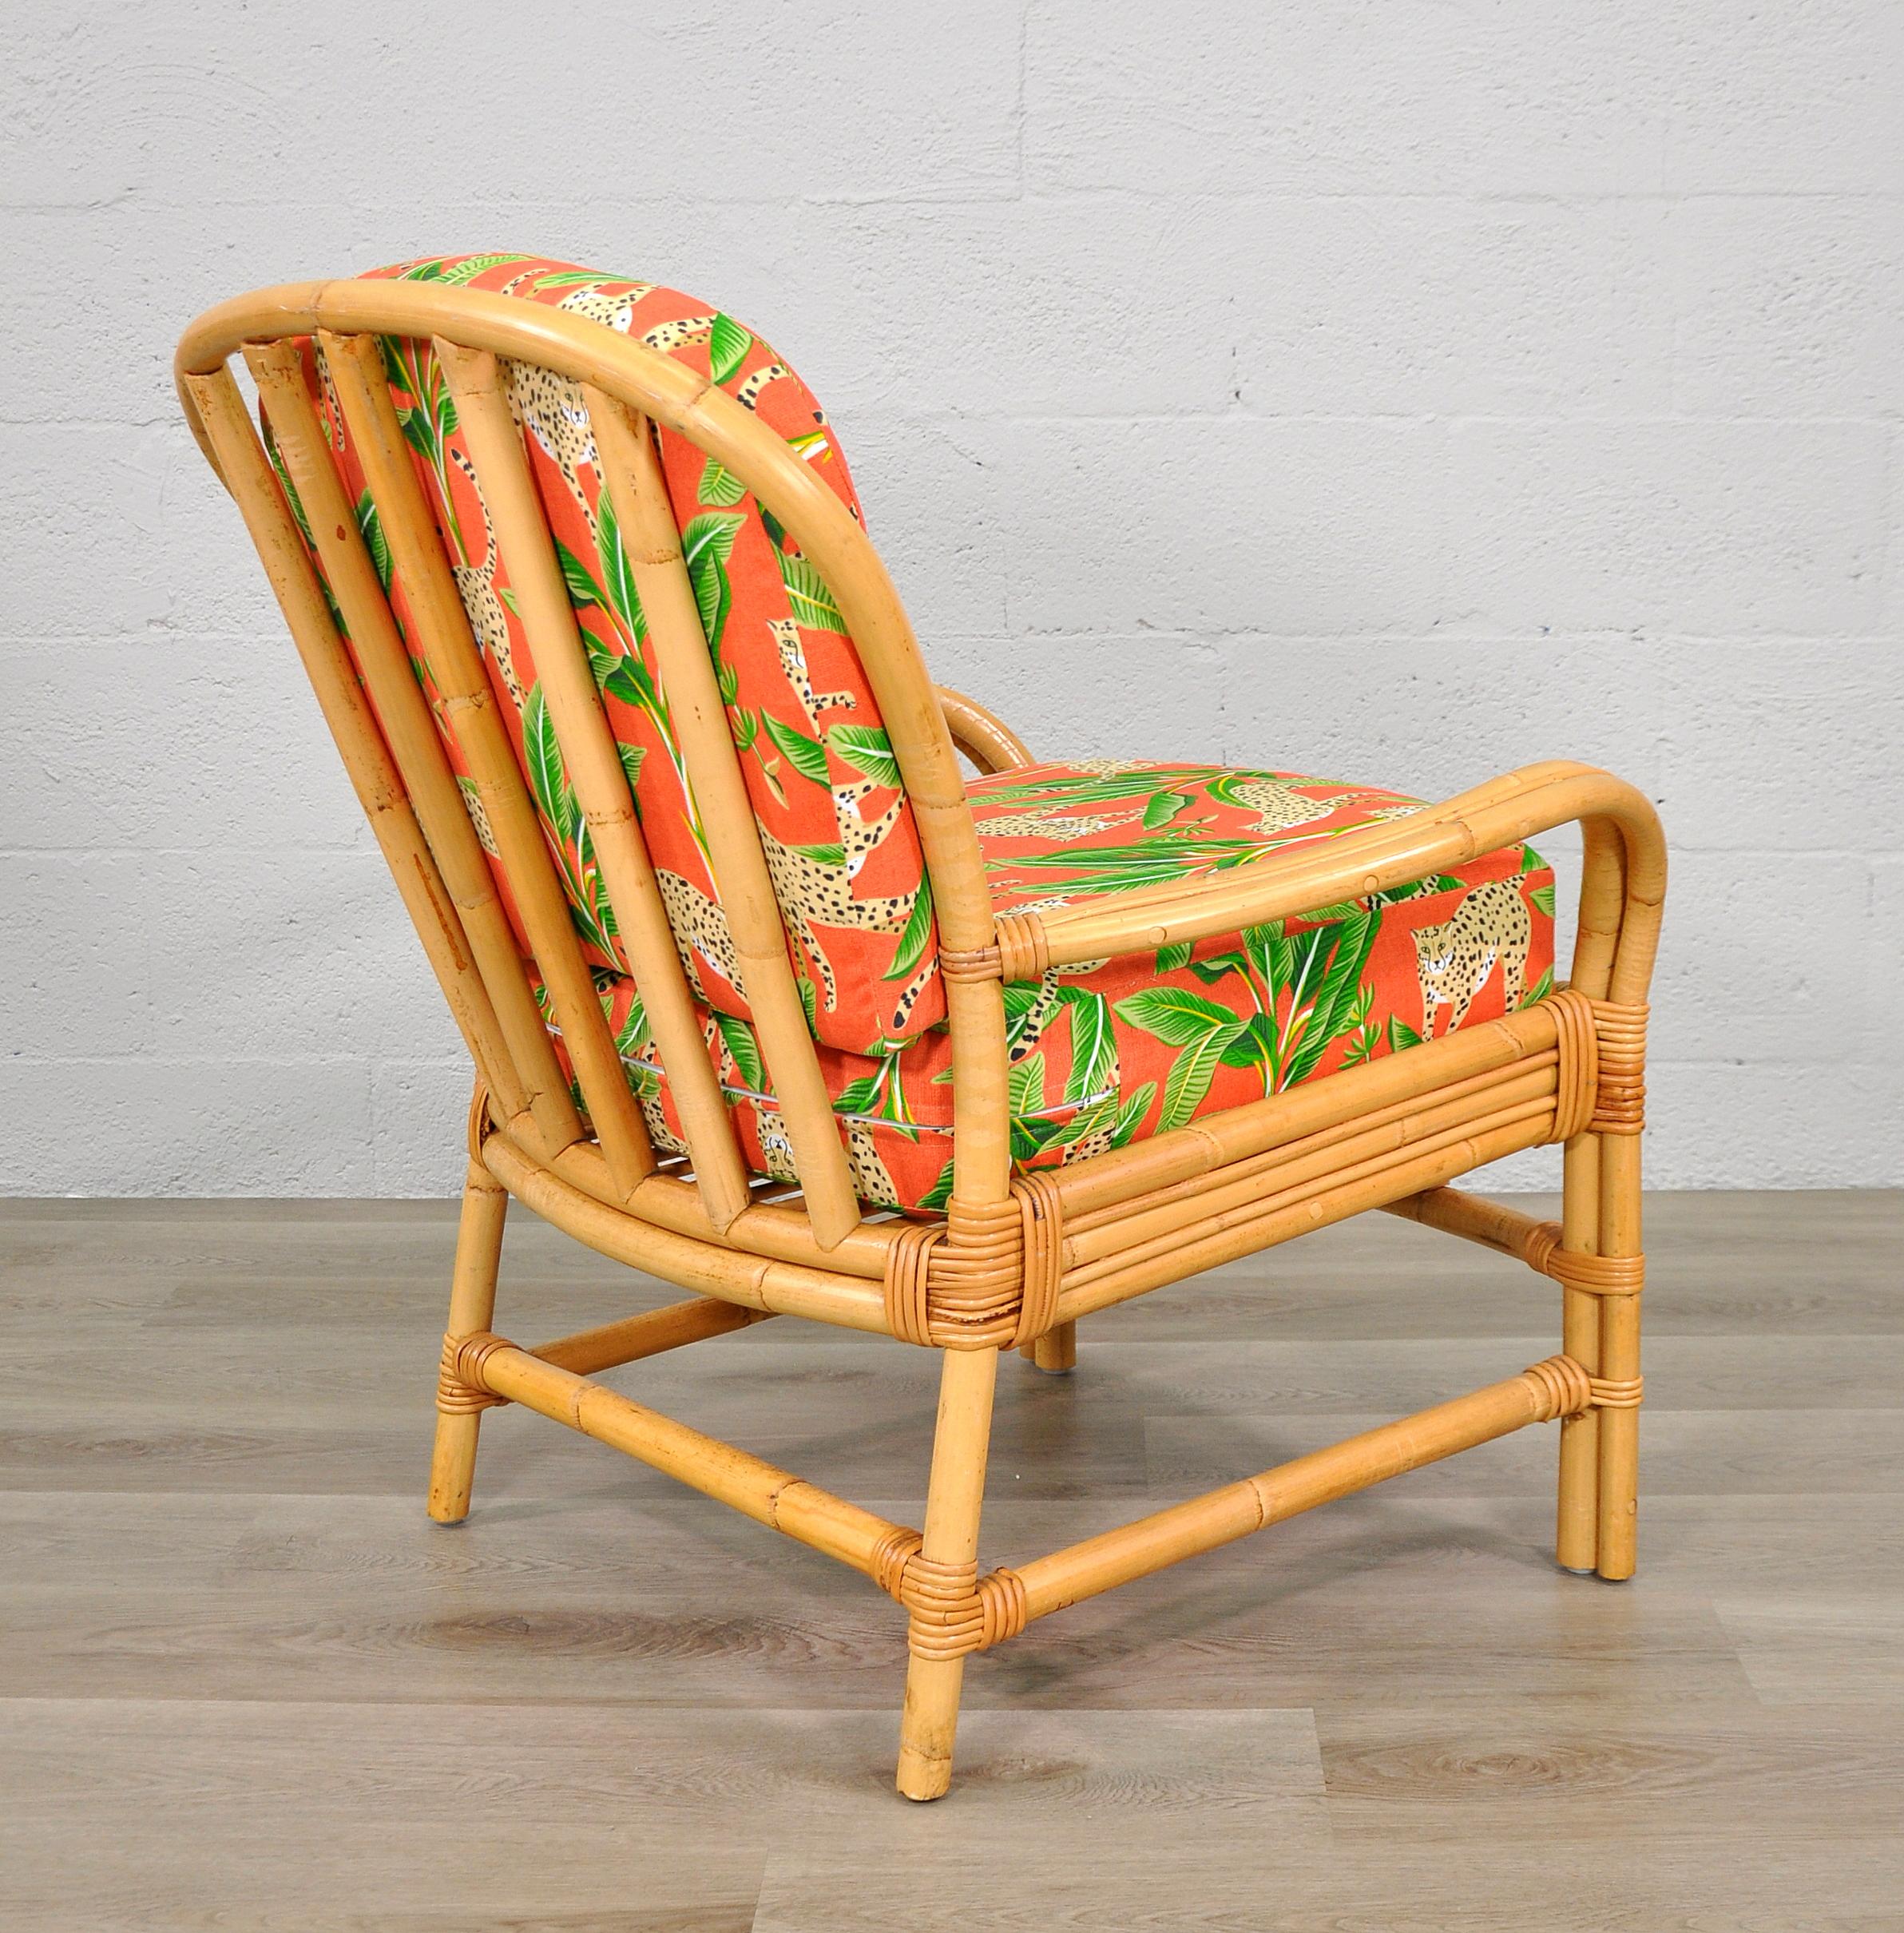 Rattan Chair with Tropical Cheetah and Palm Fabric In Excellent Condition For Sale In Miami, FL